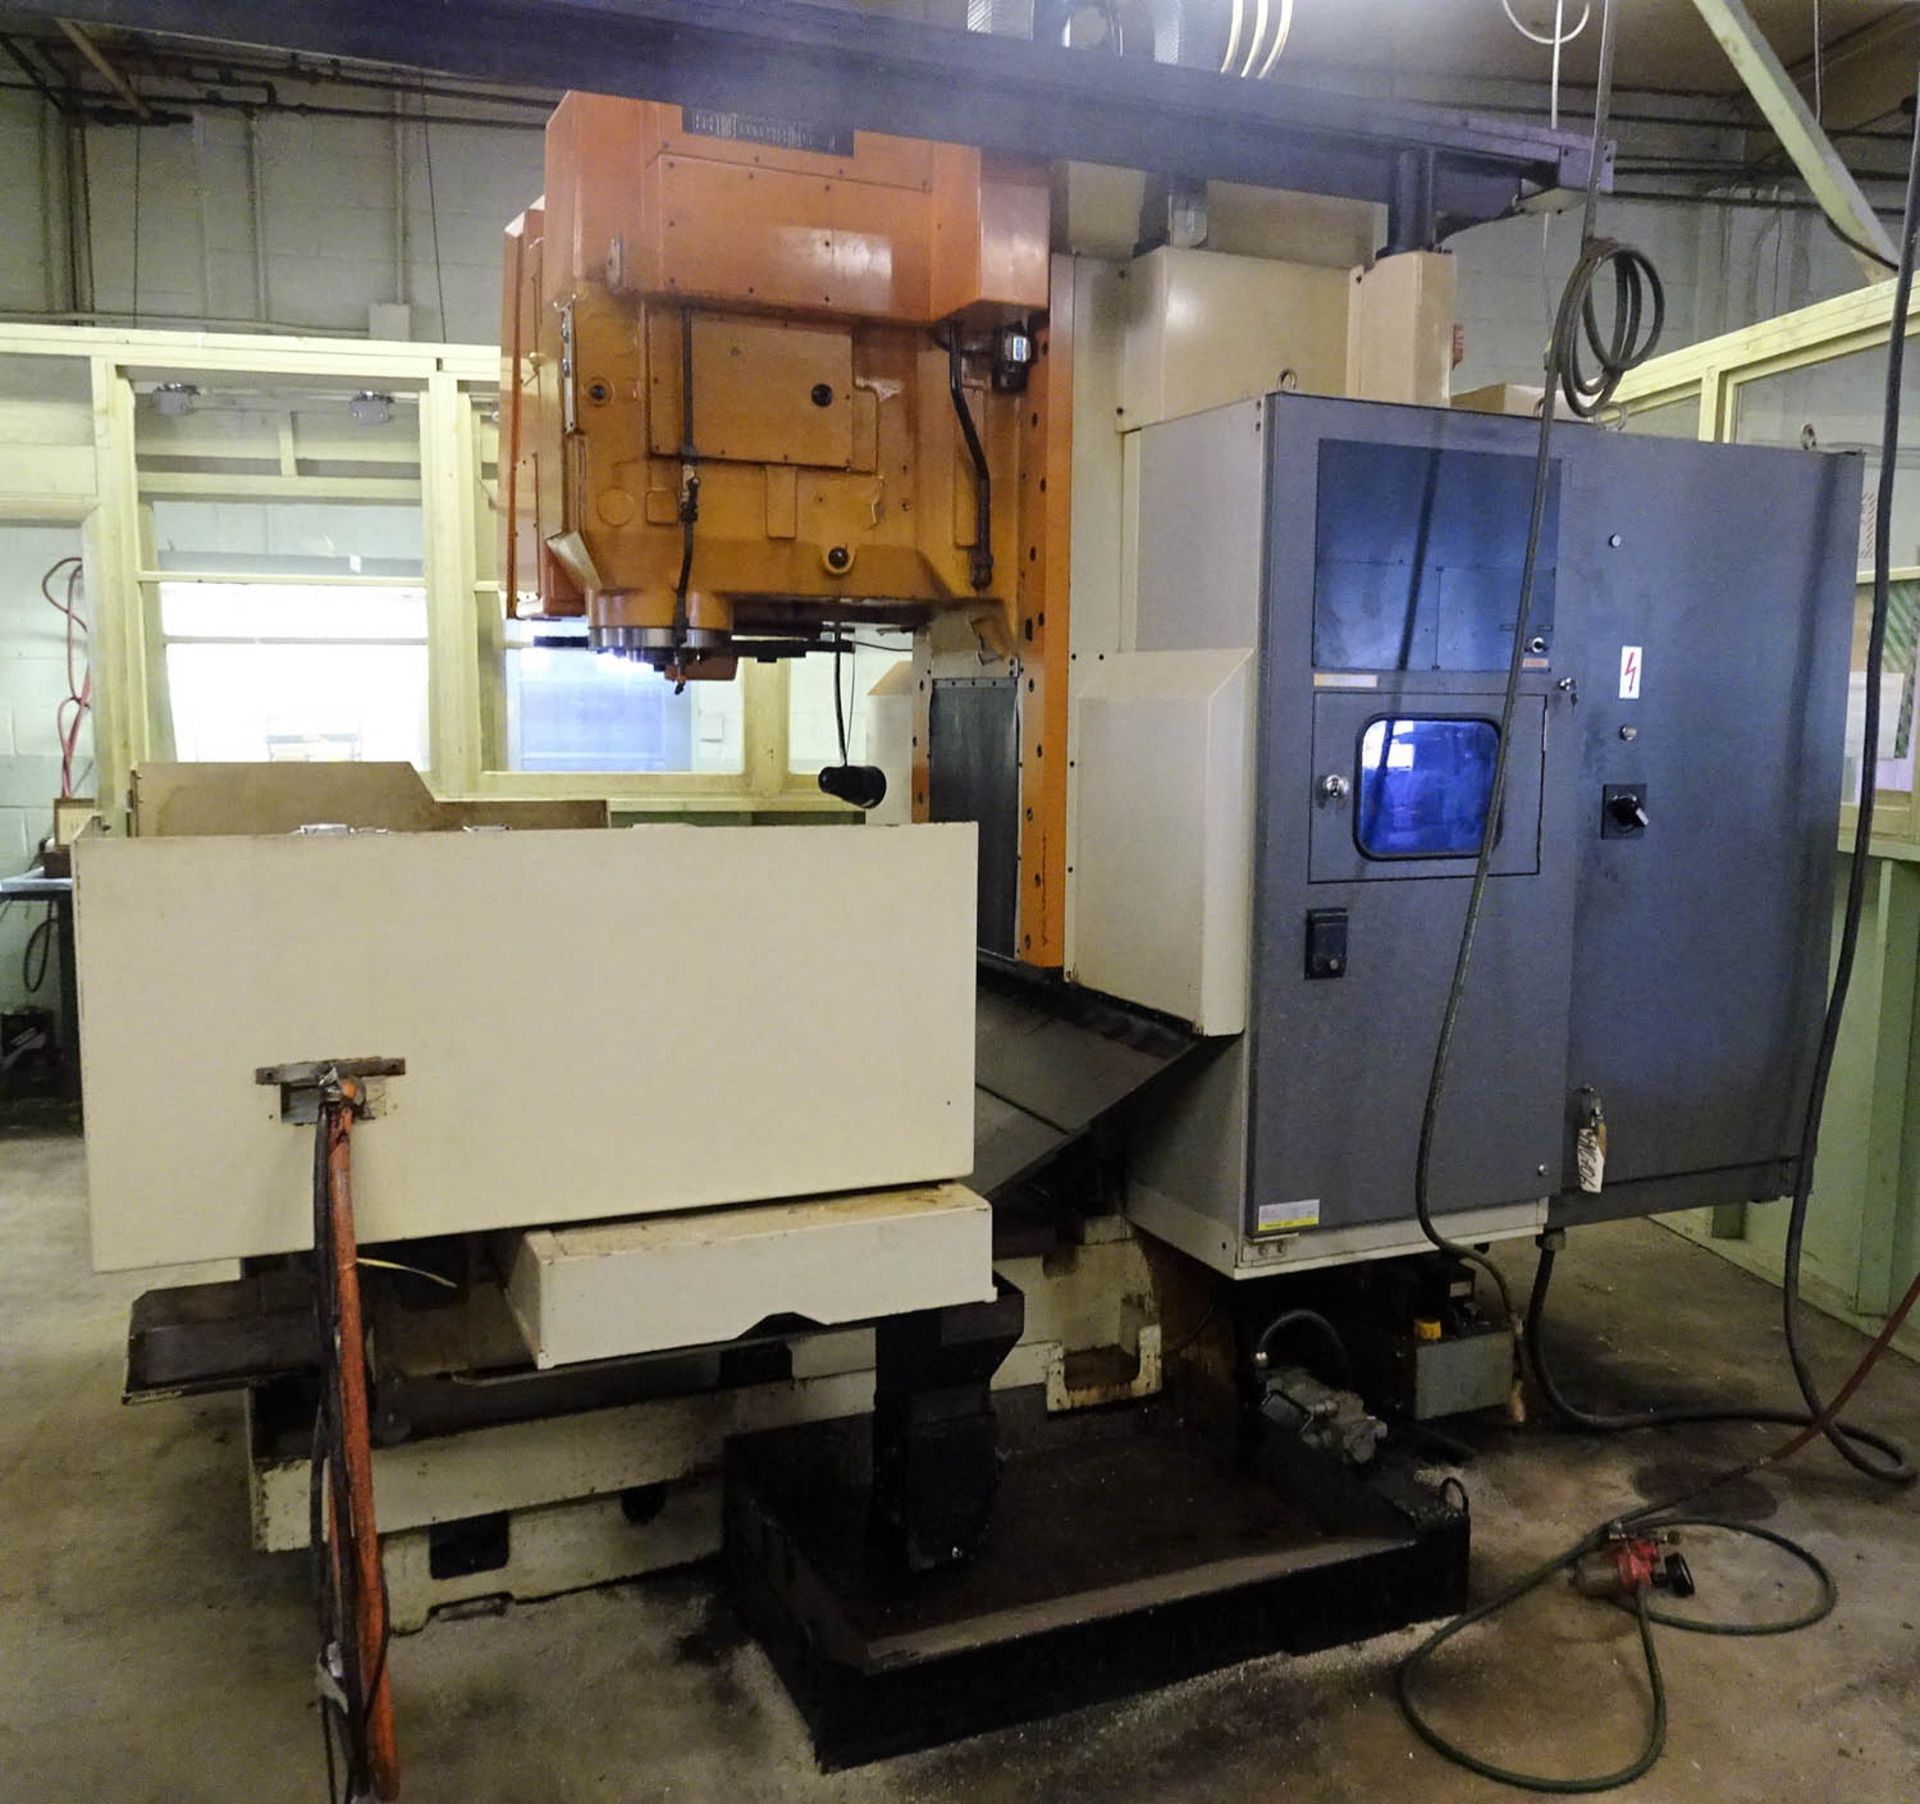 LEBLOND MAKINO MDL. FNC 106 CNC VERTICAL MACHINING CENTER, WITH 24" X 55" TABLE, MAKINO ROTARY - Image 2 of 11